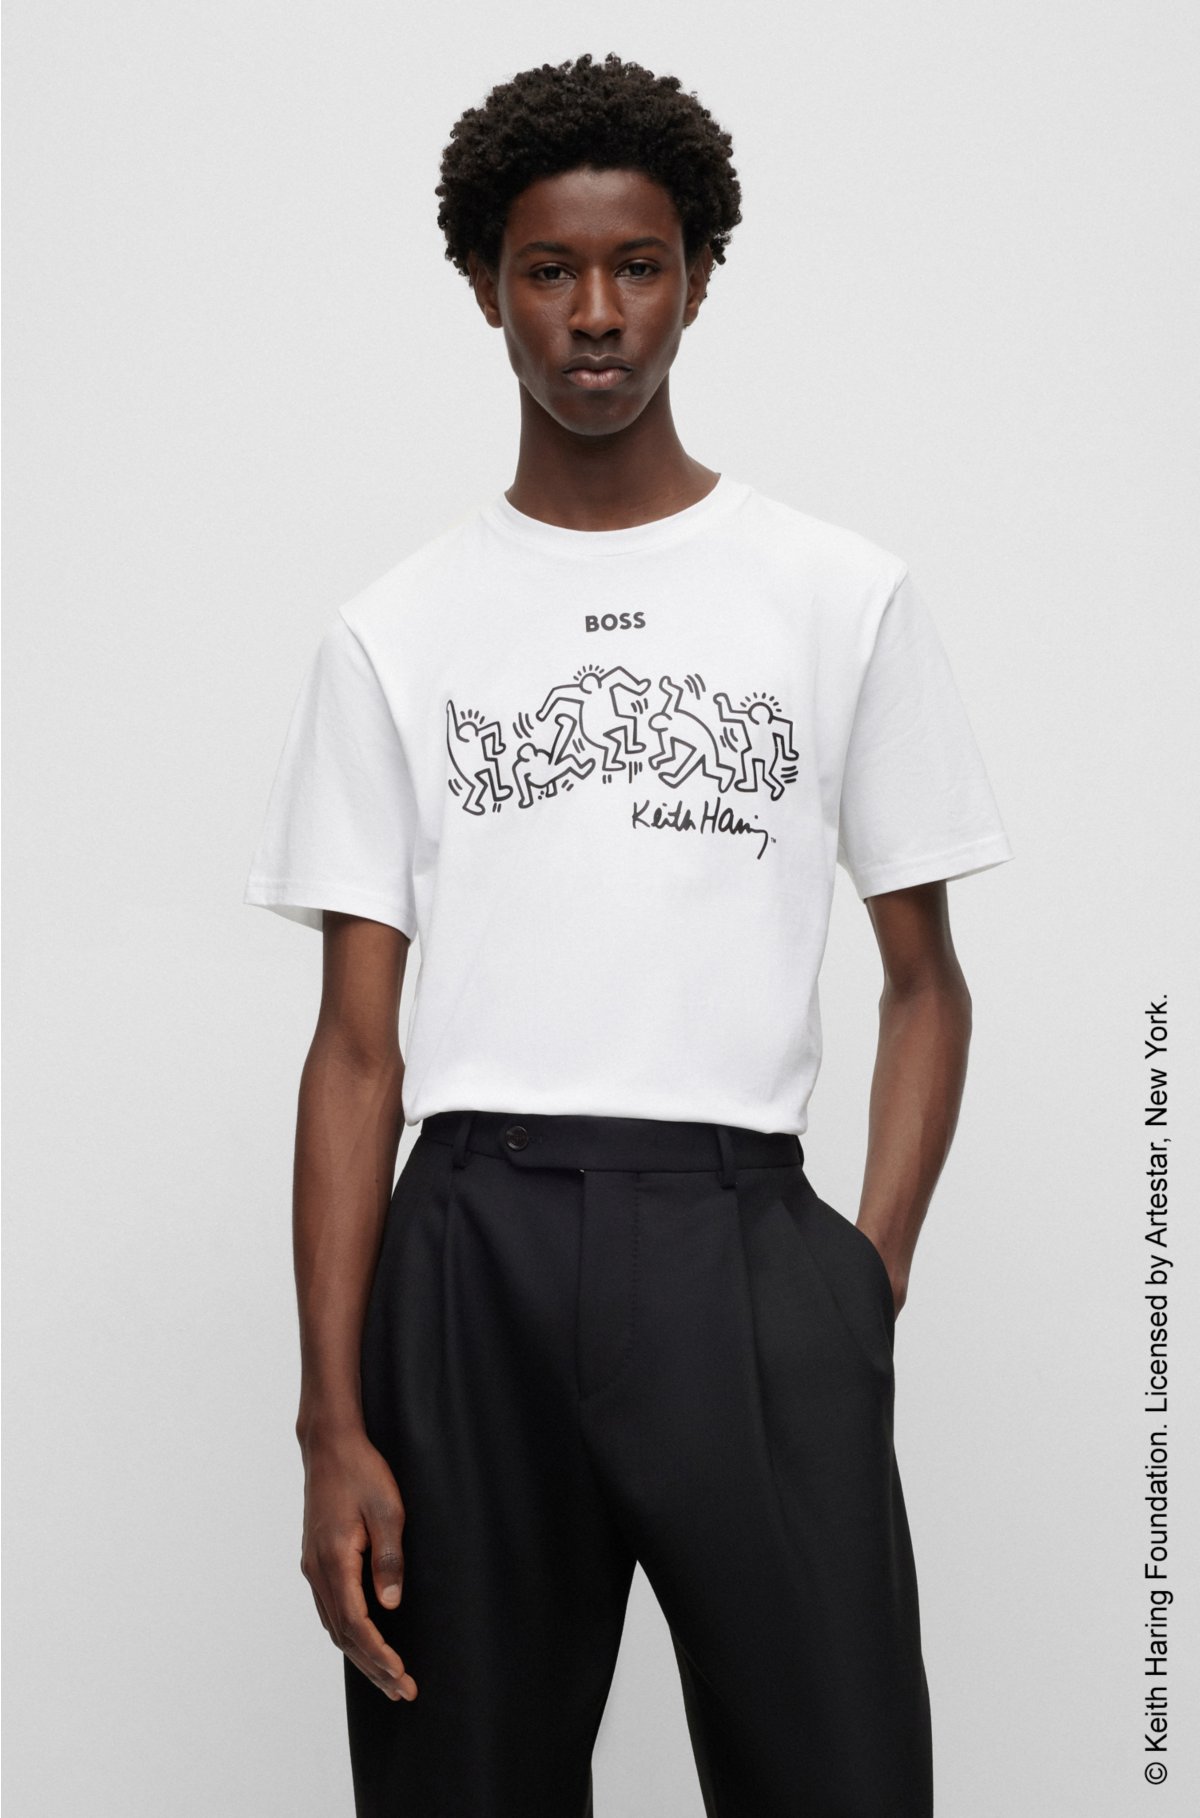 BOSS - BOSS x Keith Haring gender-neutral T-shirt with special 